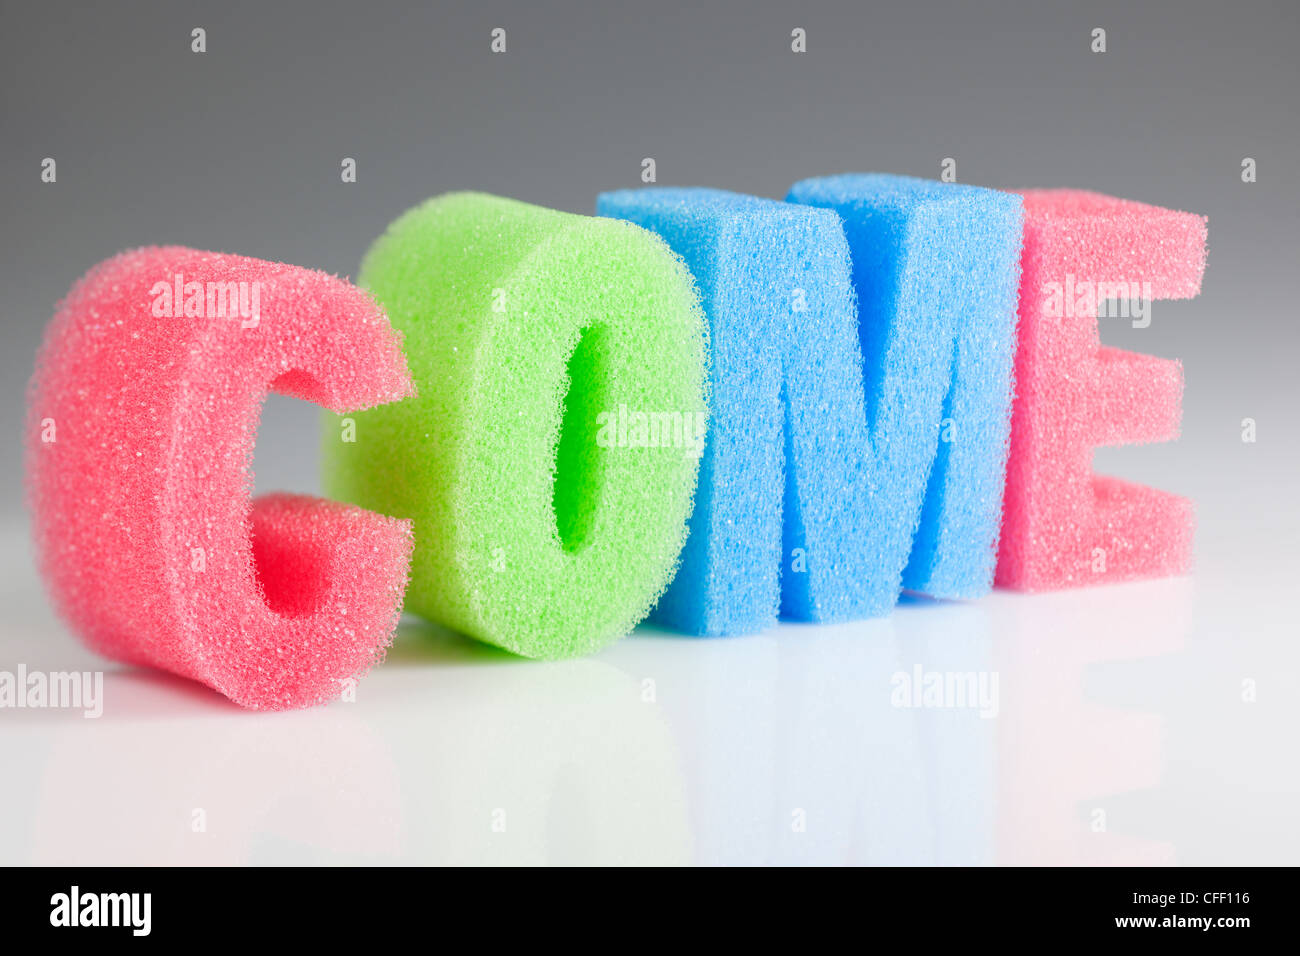 Come spelled out in coloured sponge letters Stock Photo